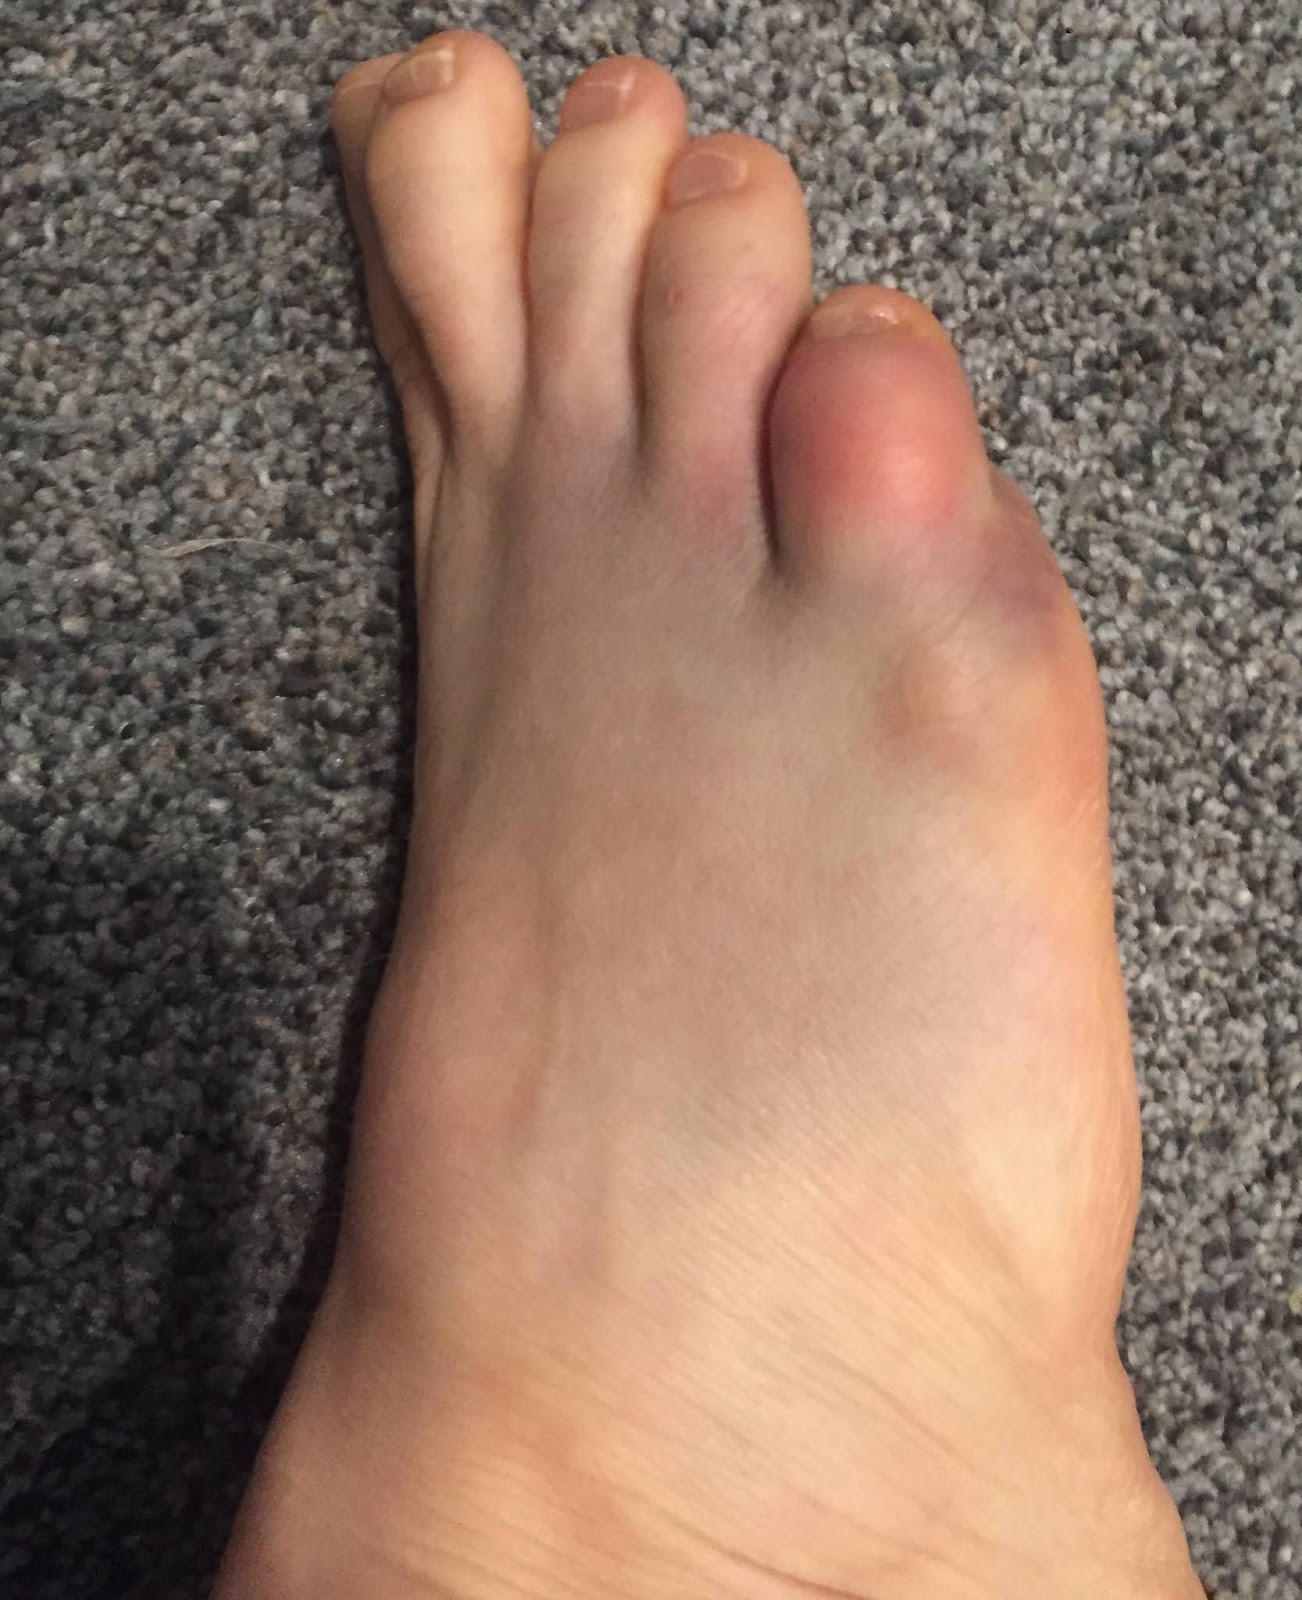 Collection 90+ Images bruise on side of foot no reason Sharp